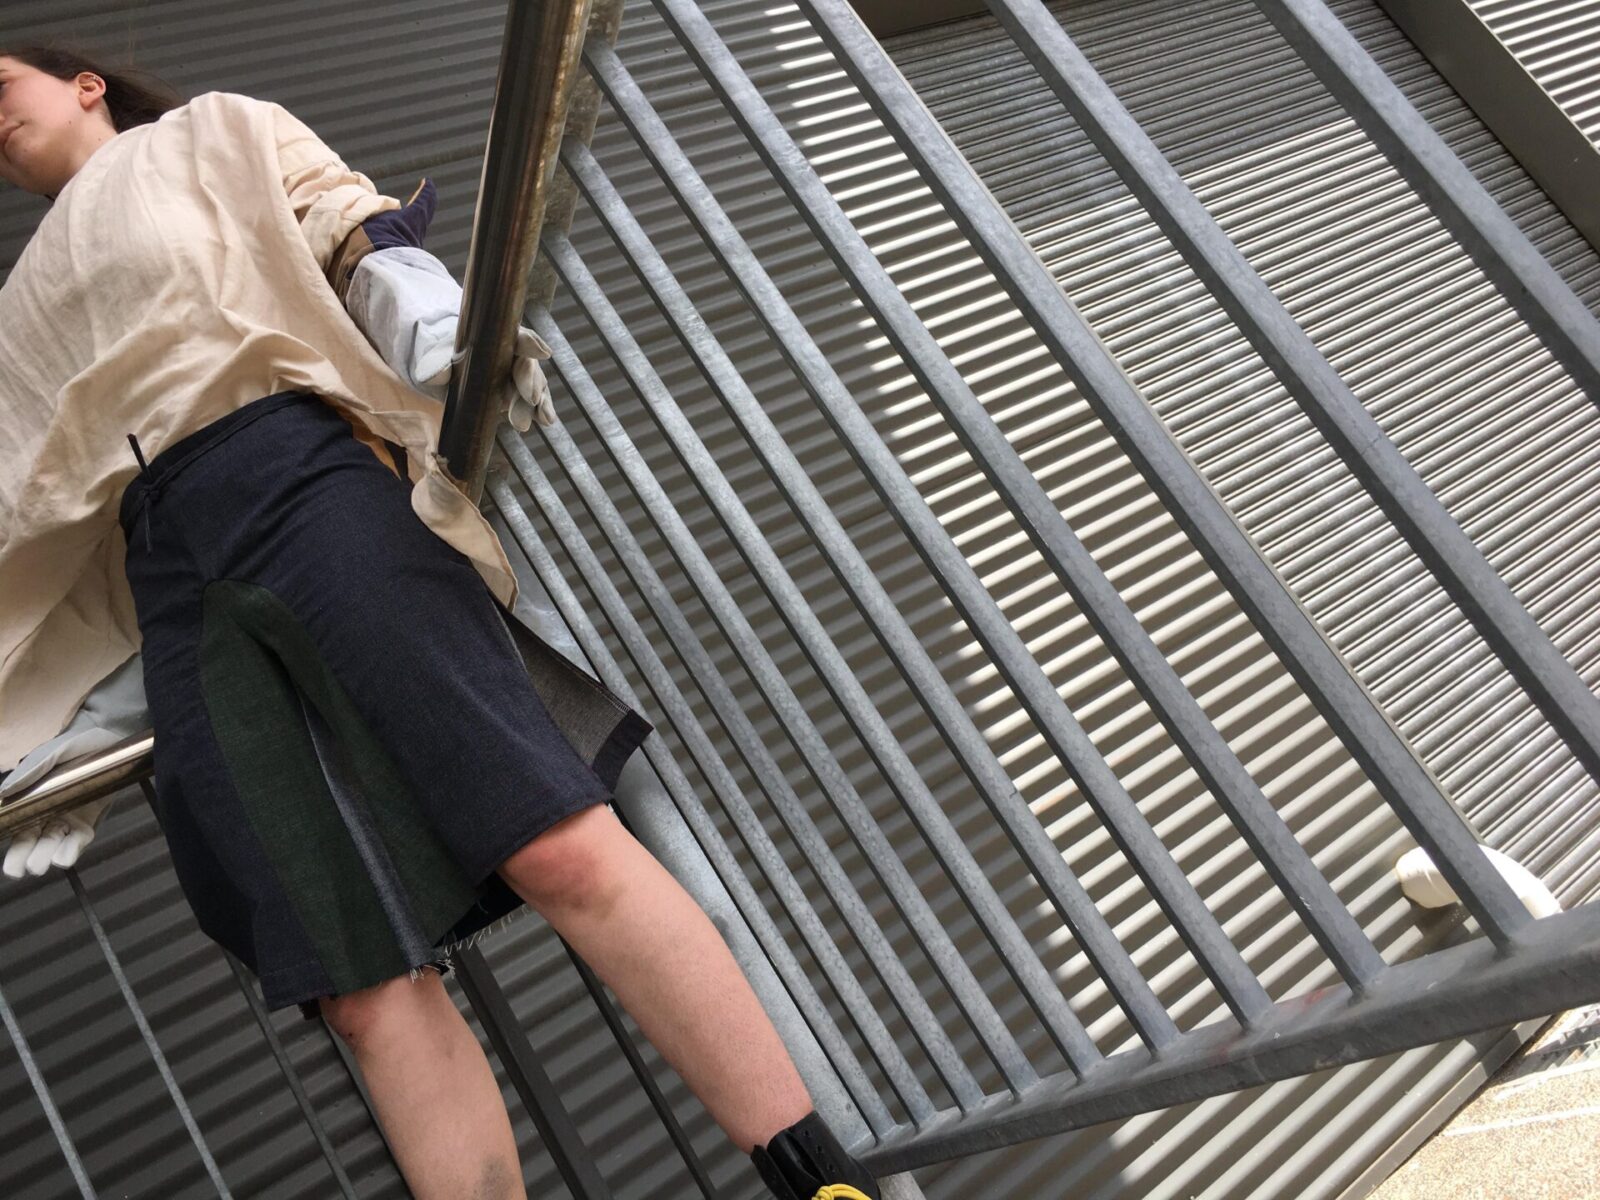 Person wearing shorts and shirt leaning on banister.